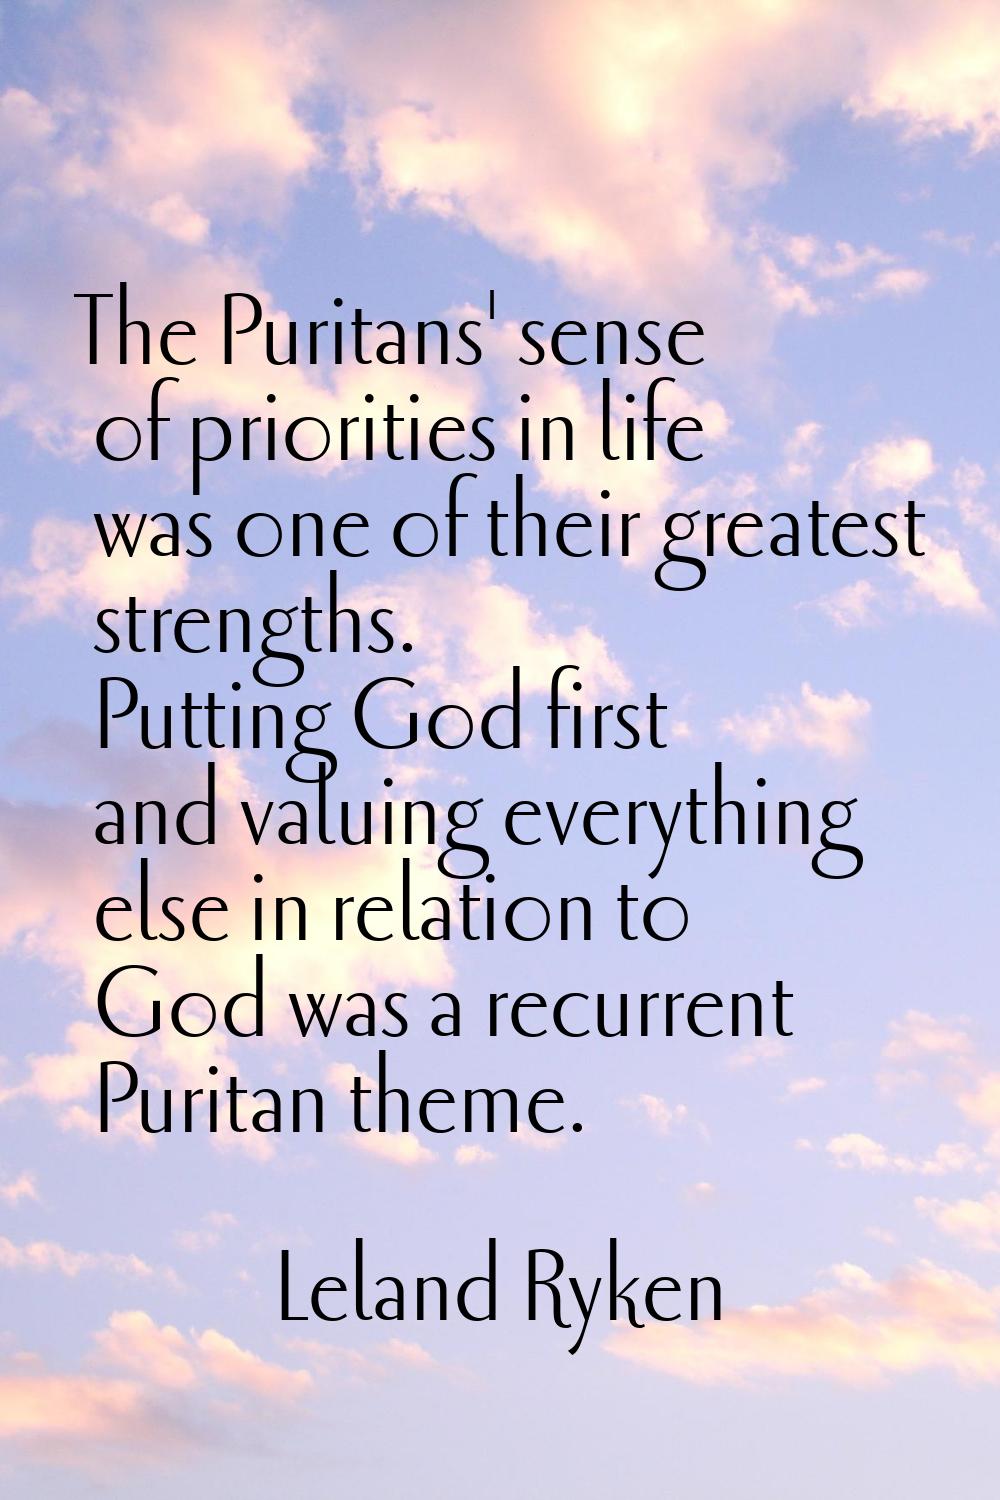 The Puritans' sense of priorities in life was one of their greatest strengths. Putting God first an